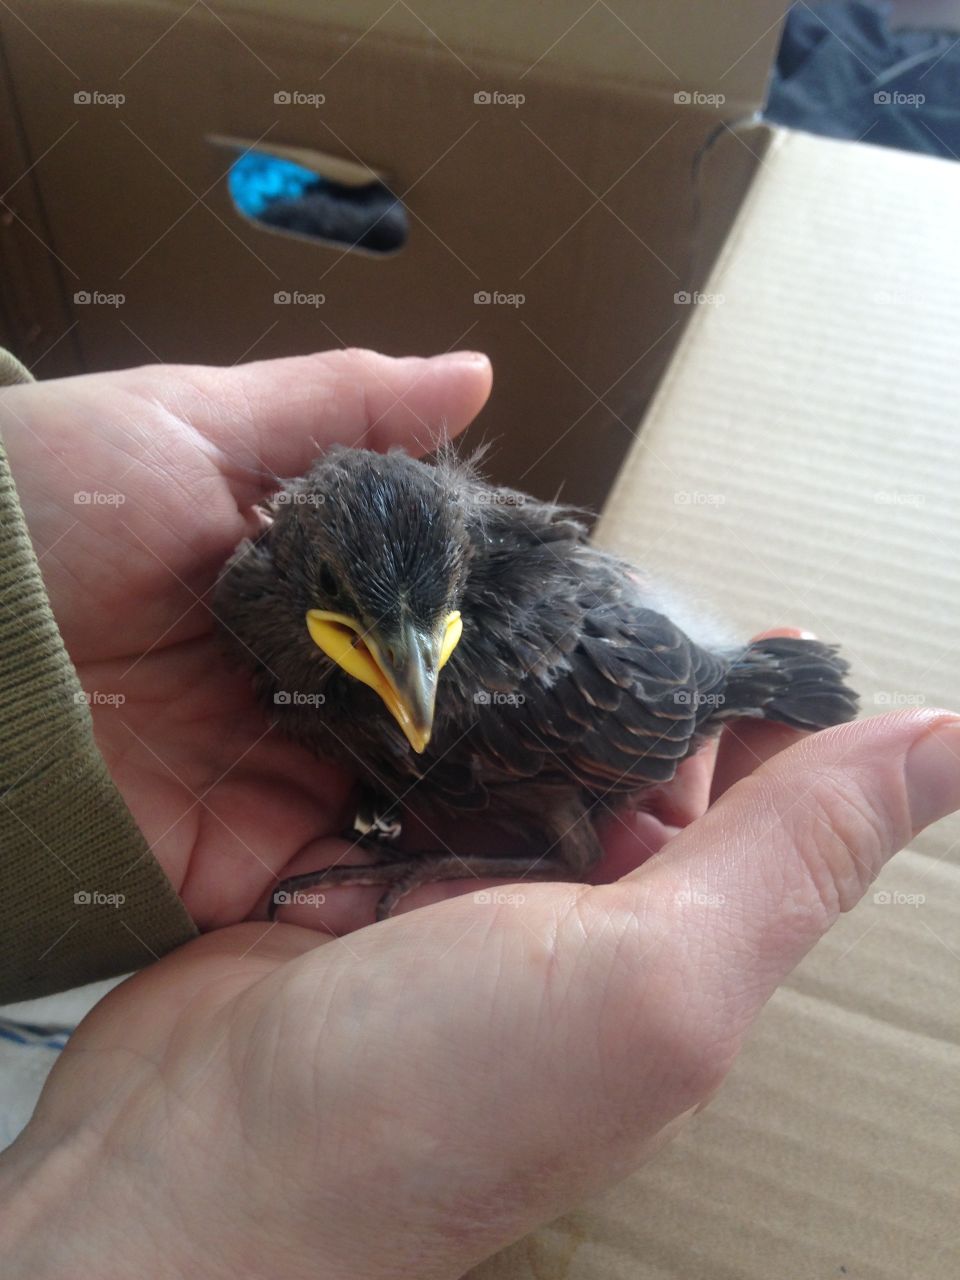 Kiki, a fledgling starling that fell out of her nest & couldn't be rescued by her parents (we waited). We rescued her before she died of dehydration or starvation. She's named Kiki after the sounds she originally made. She liked grapes and mealworms.